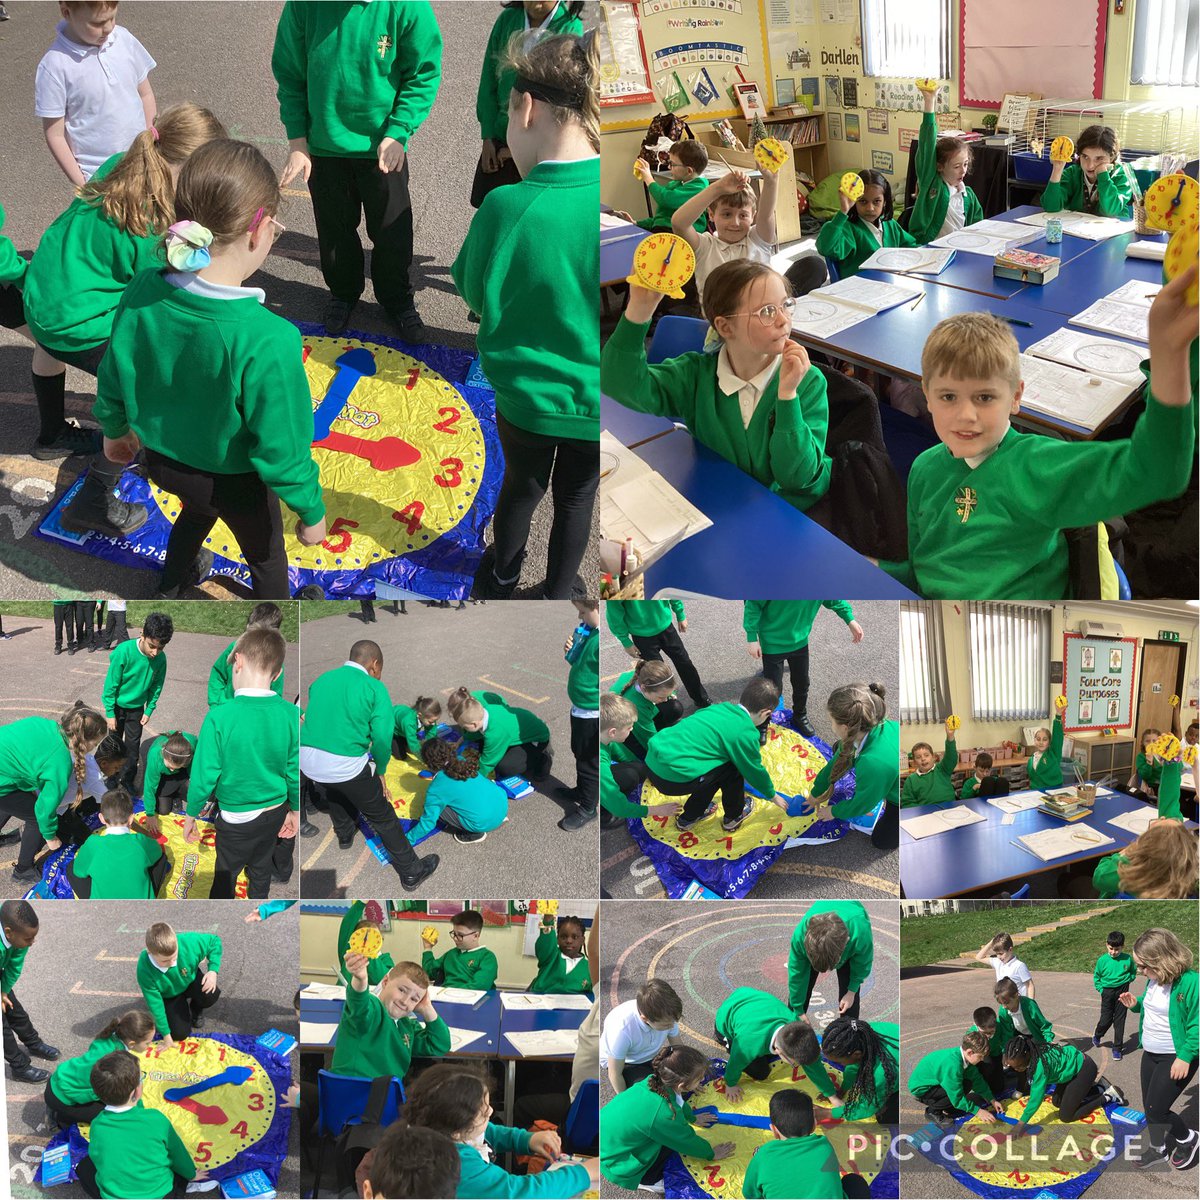 Dosbarth Severn (Year 4) have shown excellent resilience this afternoon learning about the time. We took our learning outdoors and challenged ourselves to work out different times on the clock #Stdavidsciwsevern #Stdavidsciwnumeracy #stdavidsciwambitiouscapablelearners